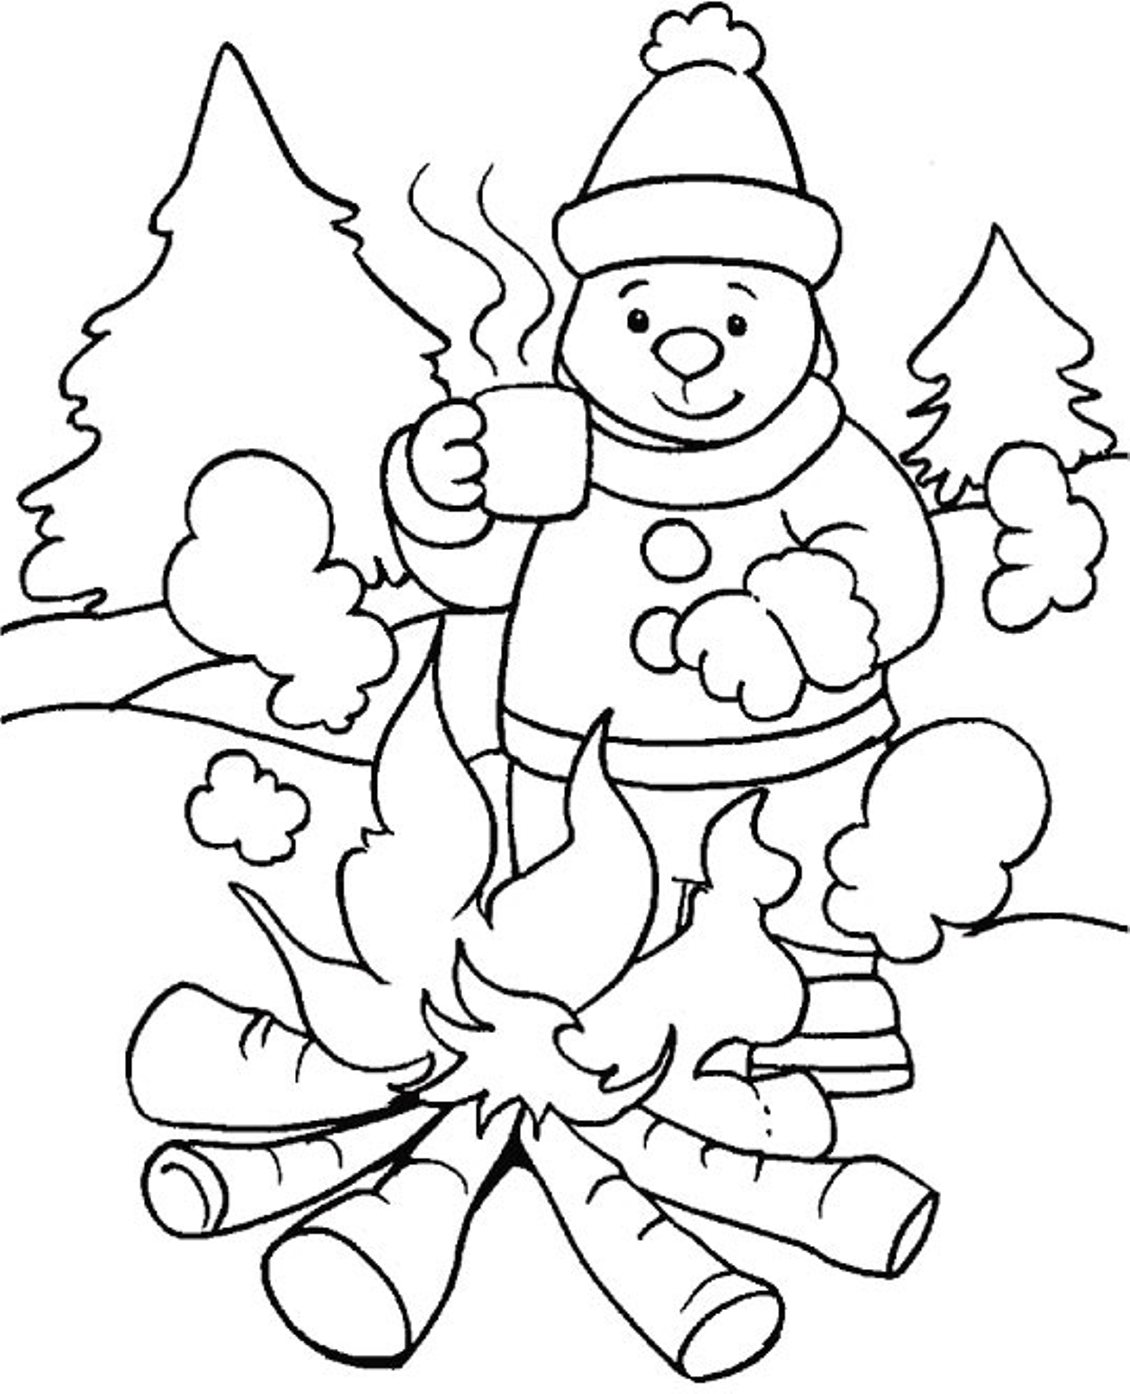 Download Free Printable Winter Coloring Pages For Kids